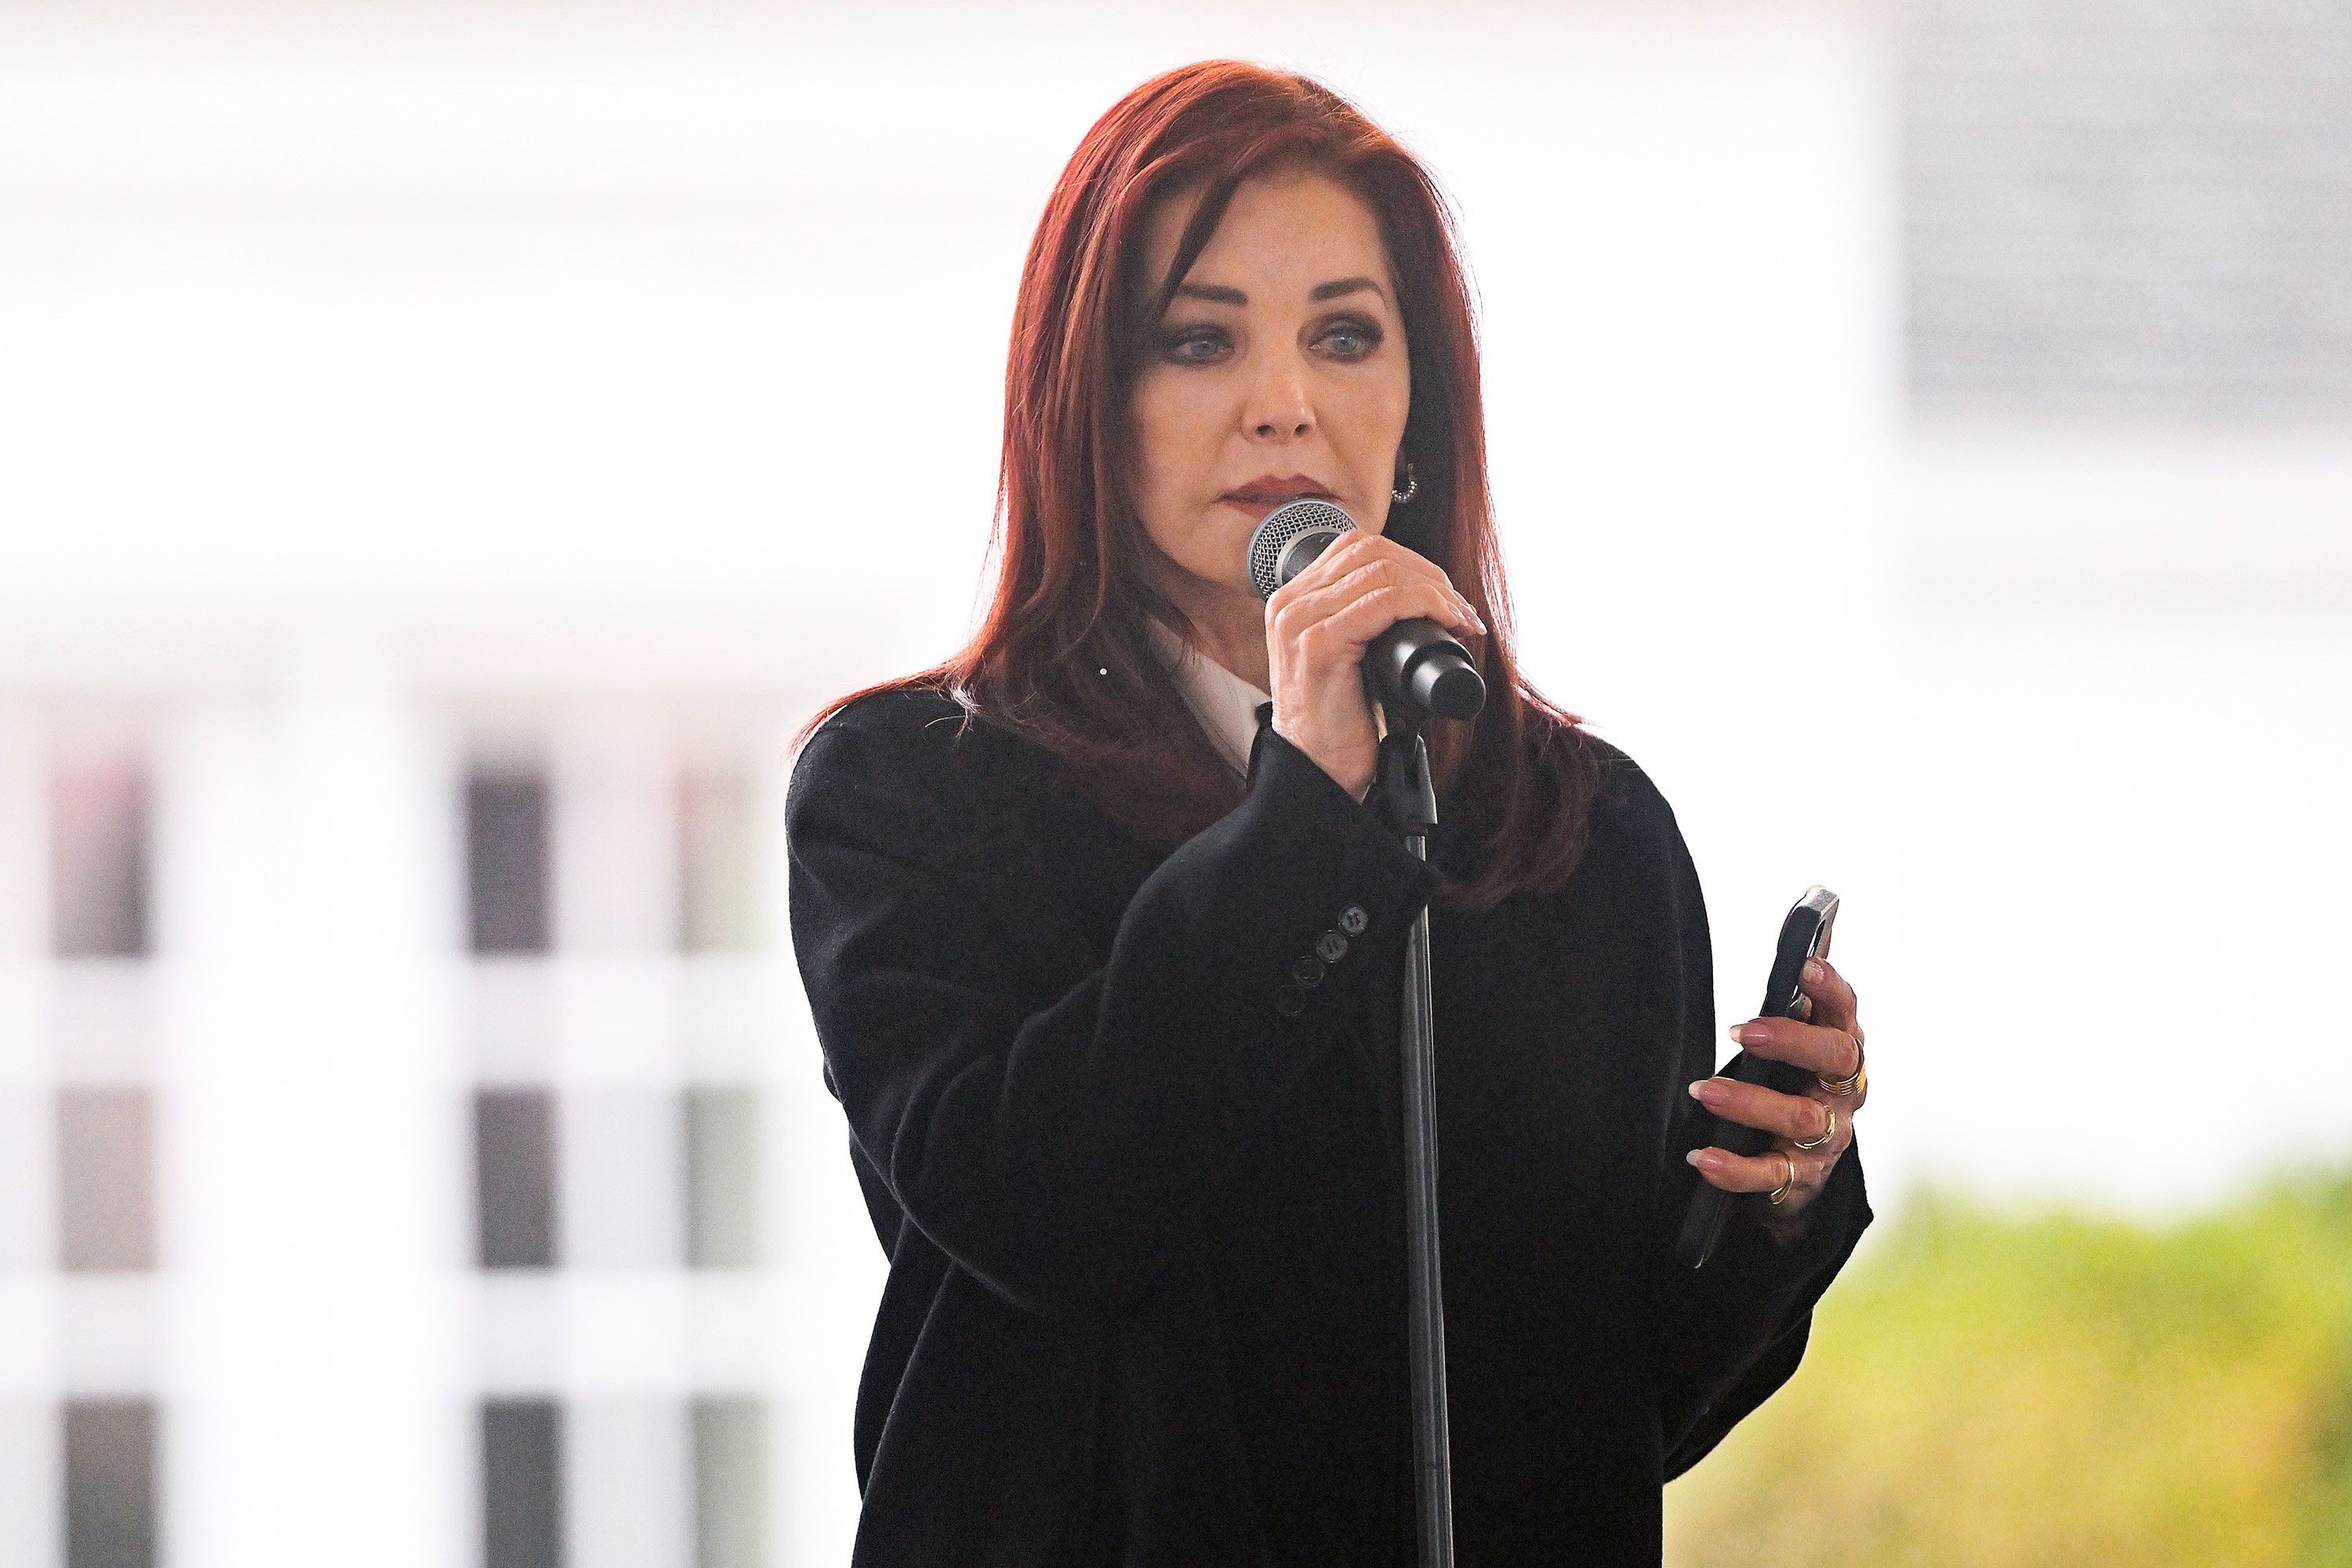 Priscilla Presley addressing the attendees at her late daughters Lisa Marie Presley funeral